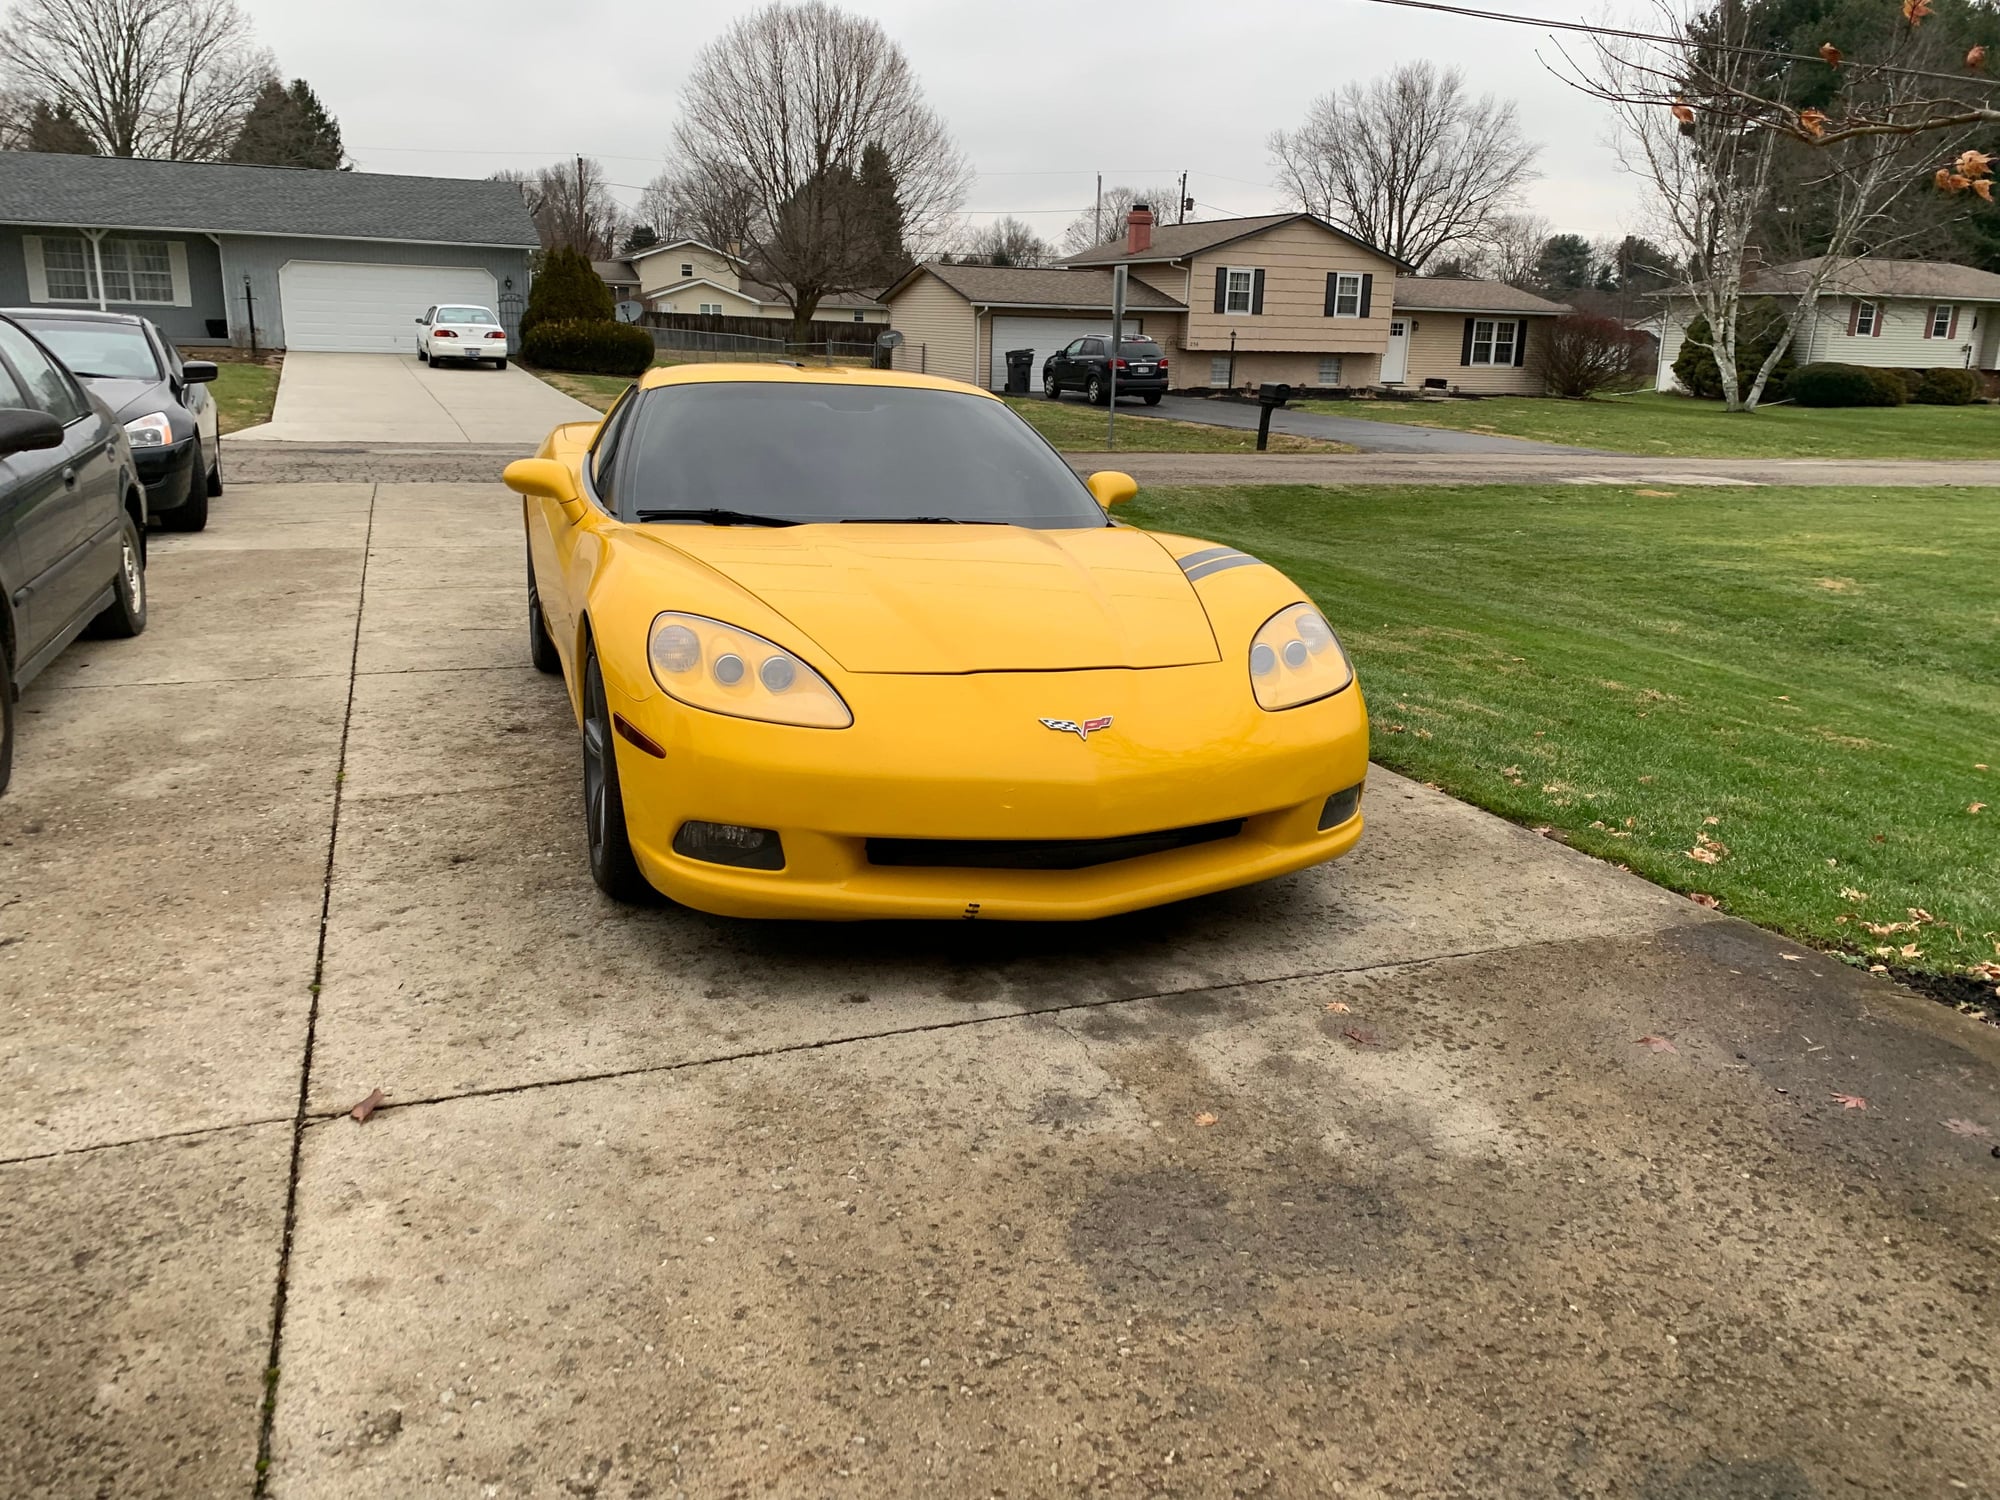 2005 Chevrolet Corvette - 05 Procharged Corvette Z51 6 speed - Used - VIN 1G1YY24U855103058 - 132,000 Miles - 8 cyl - 2WD - Manual - Coupe - Yellow - Newark, OH 43055, United States